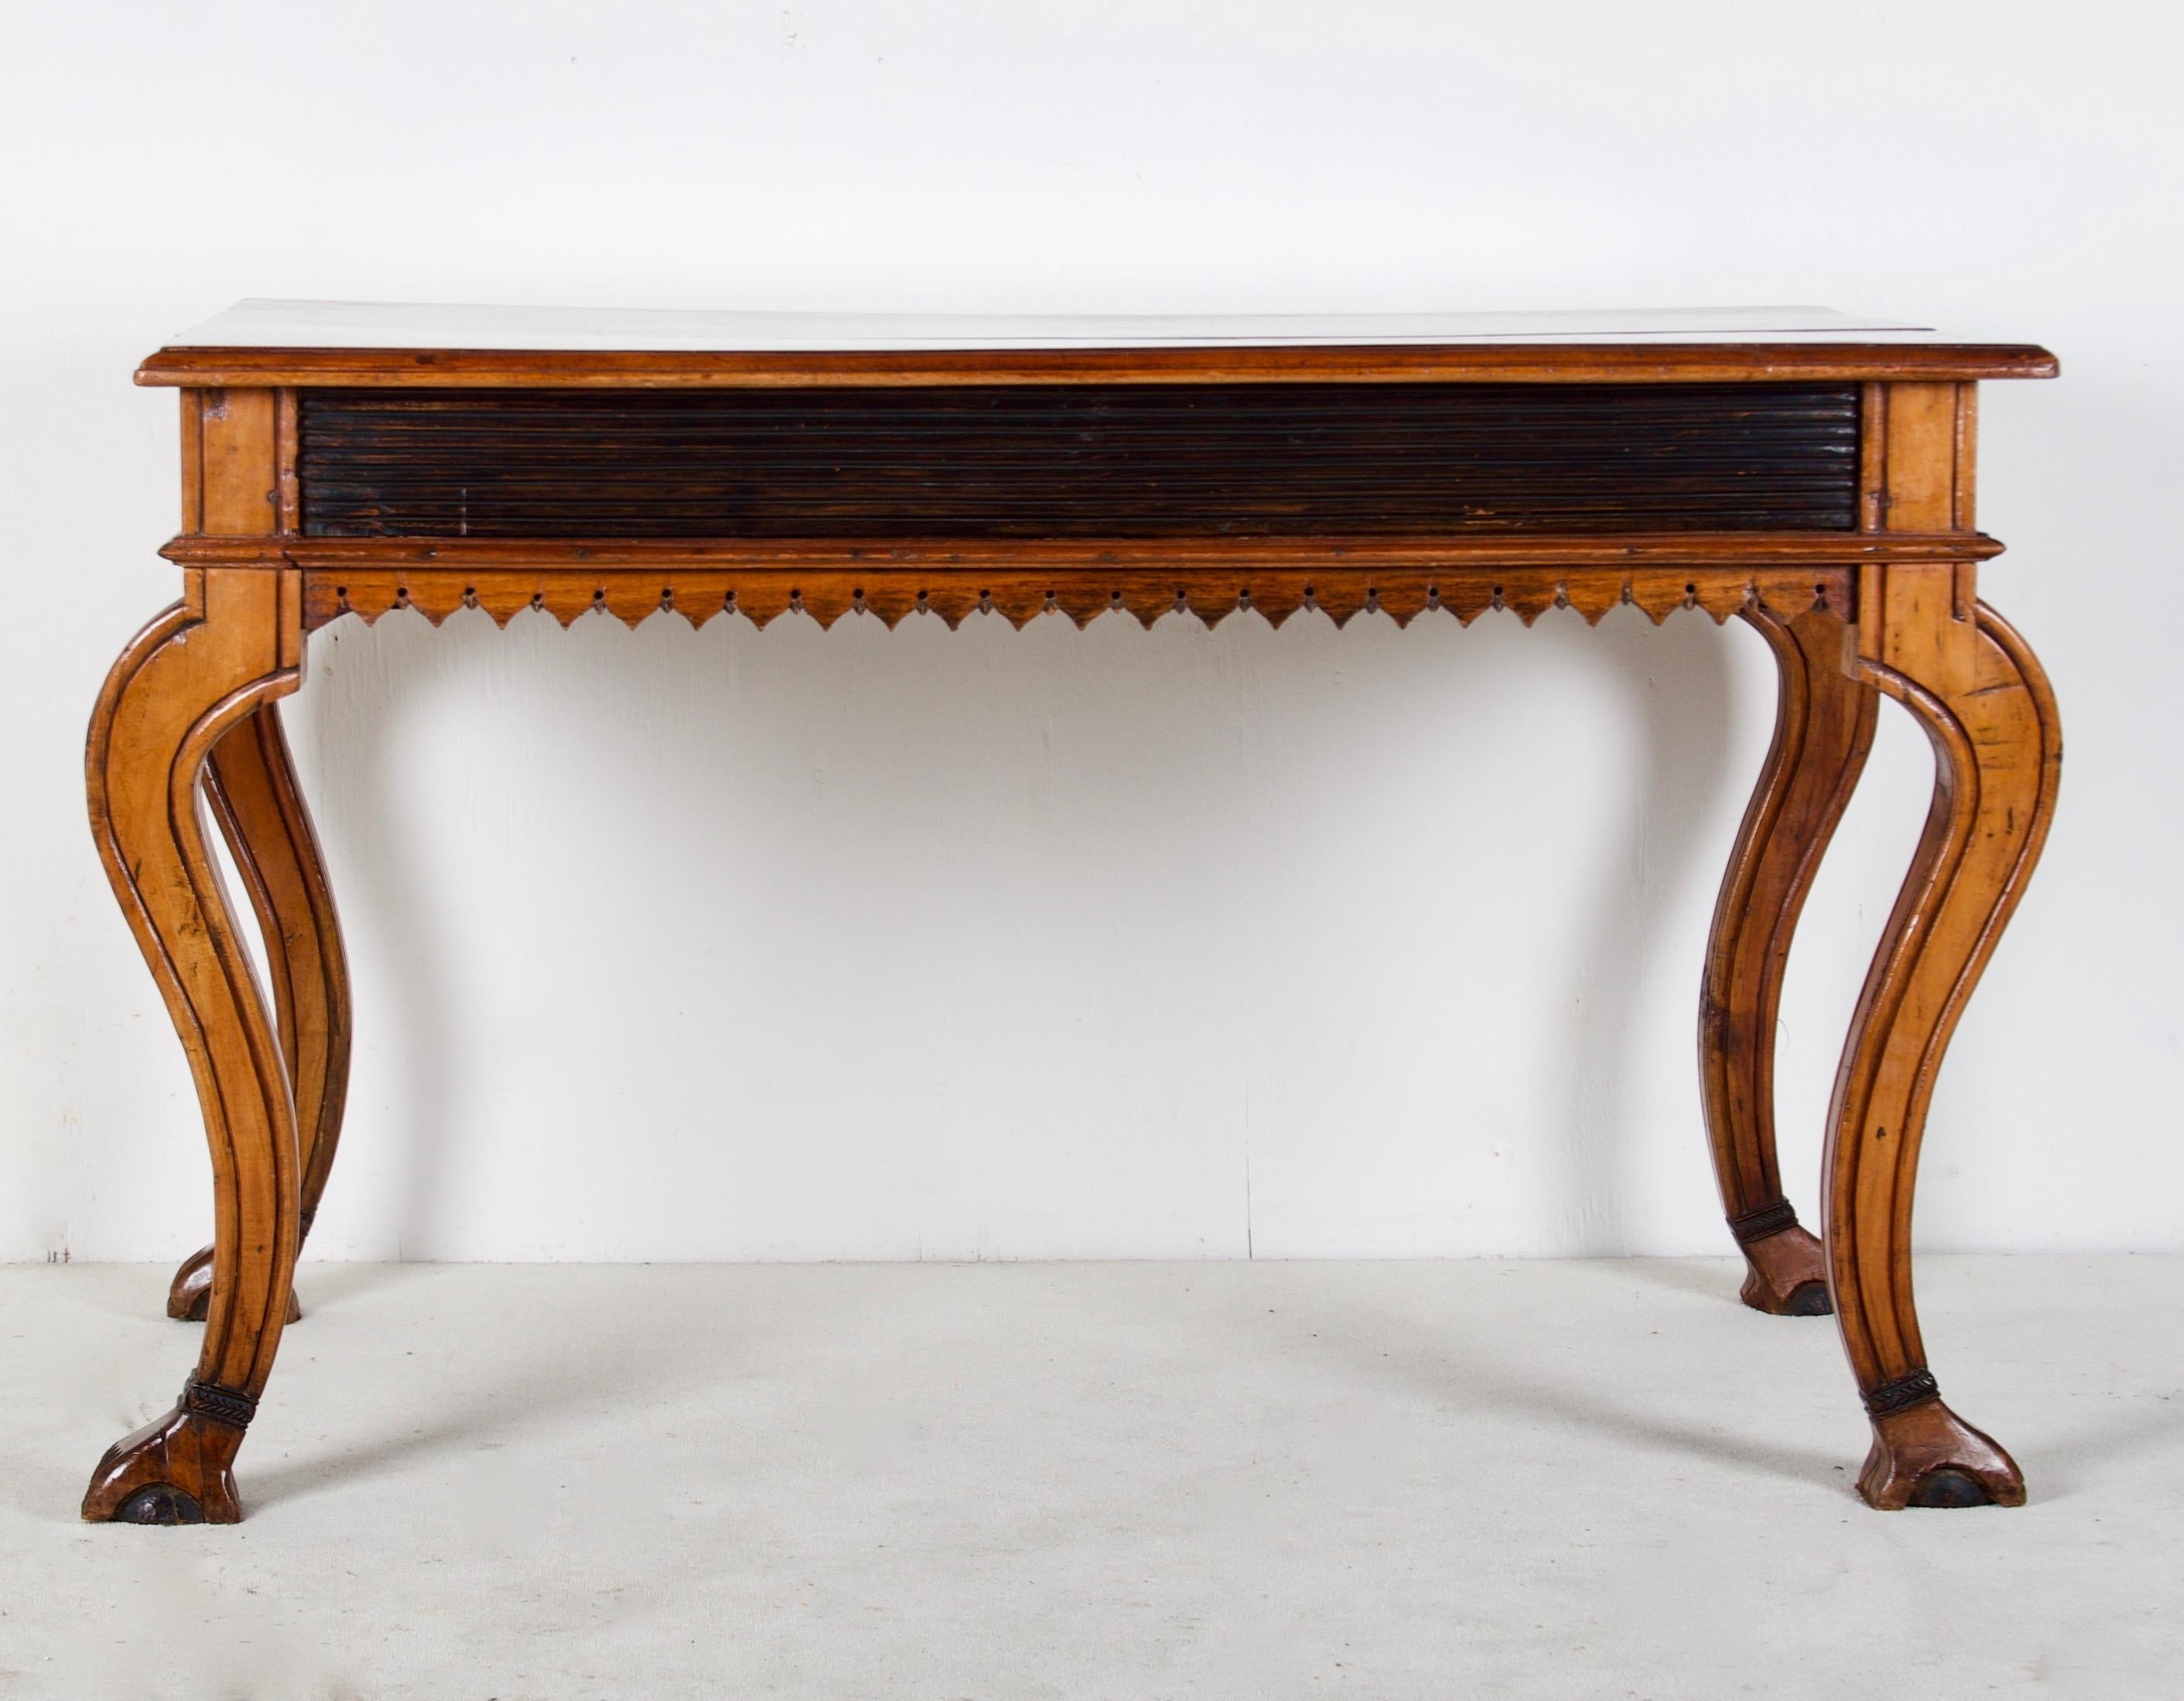 This playful and stylish desk comes from Portugal or Brazil. During
the later 19th century, both countries shared a desire for funishings
that reflect the style of the 18th Century re-interpreted. The new
Colonial style encompasses elements from